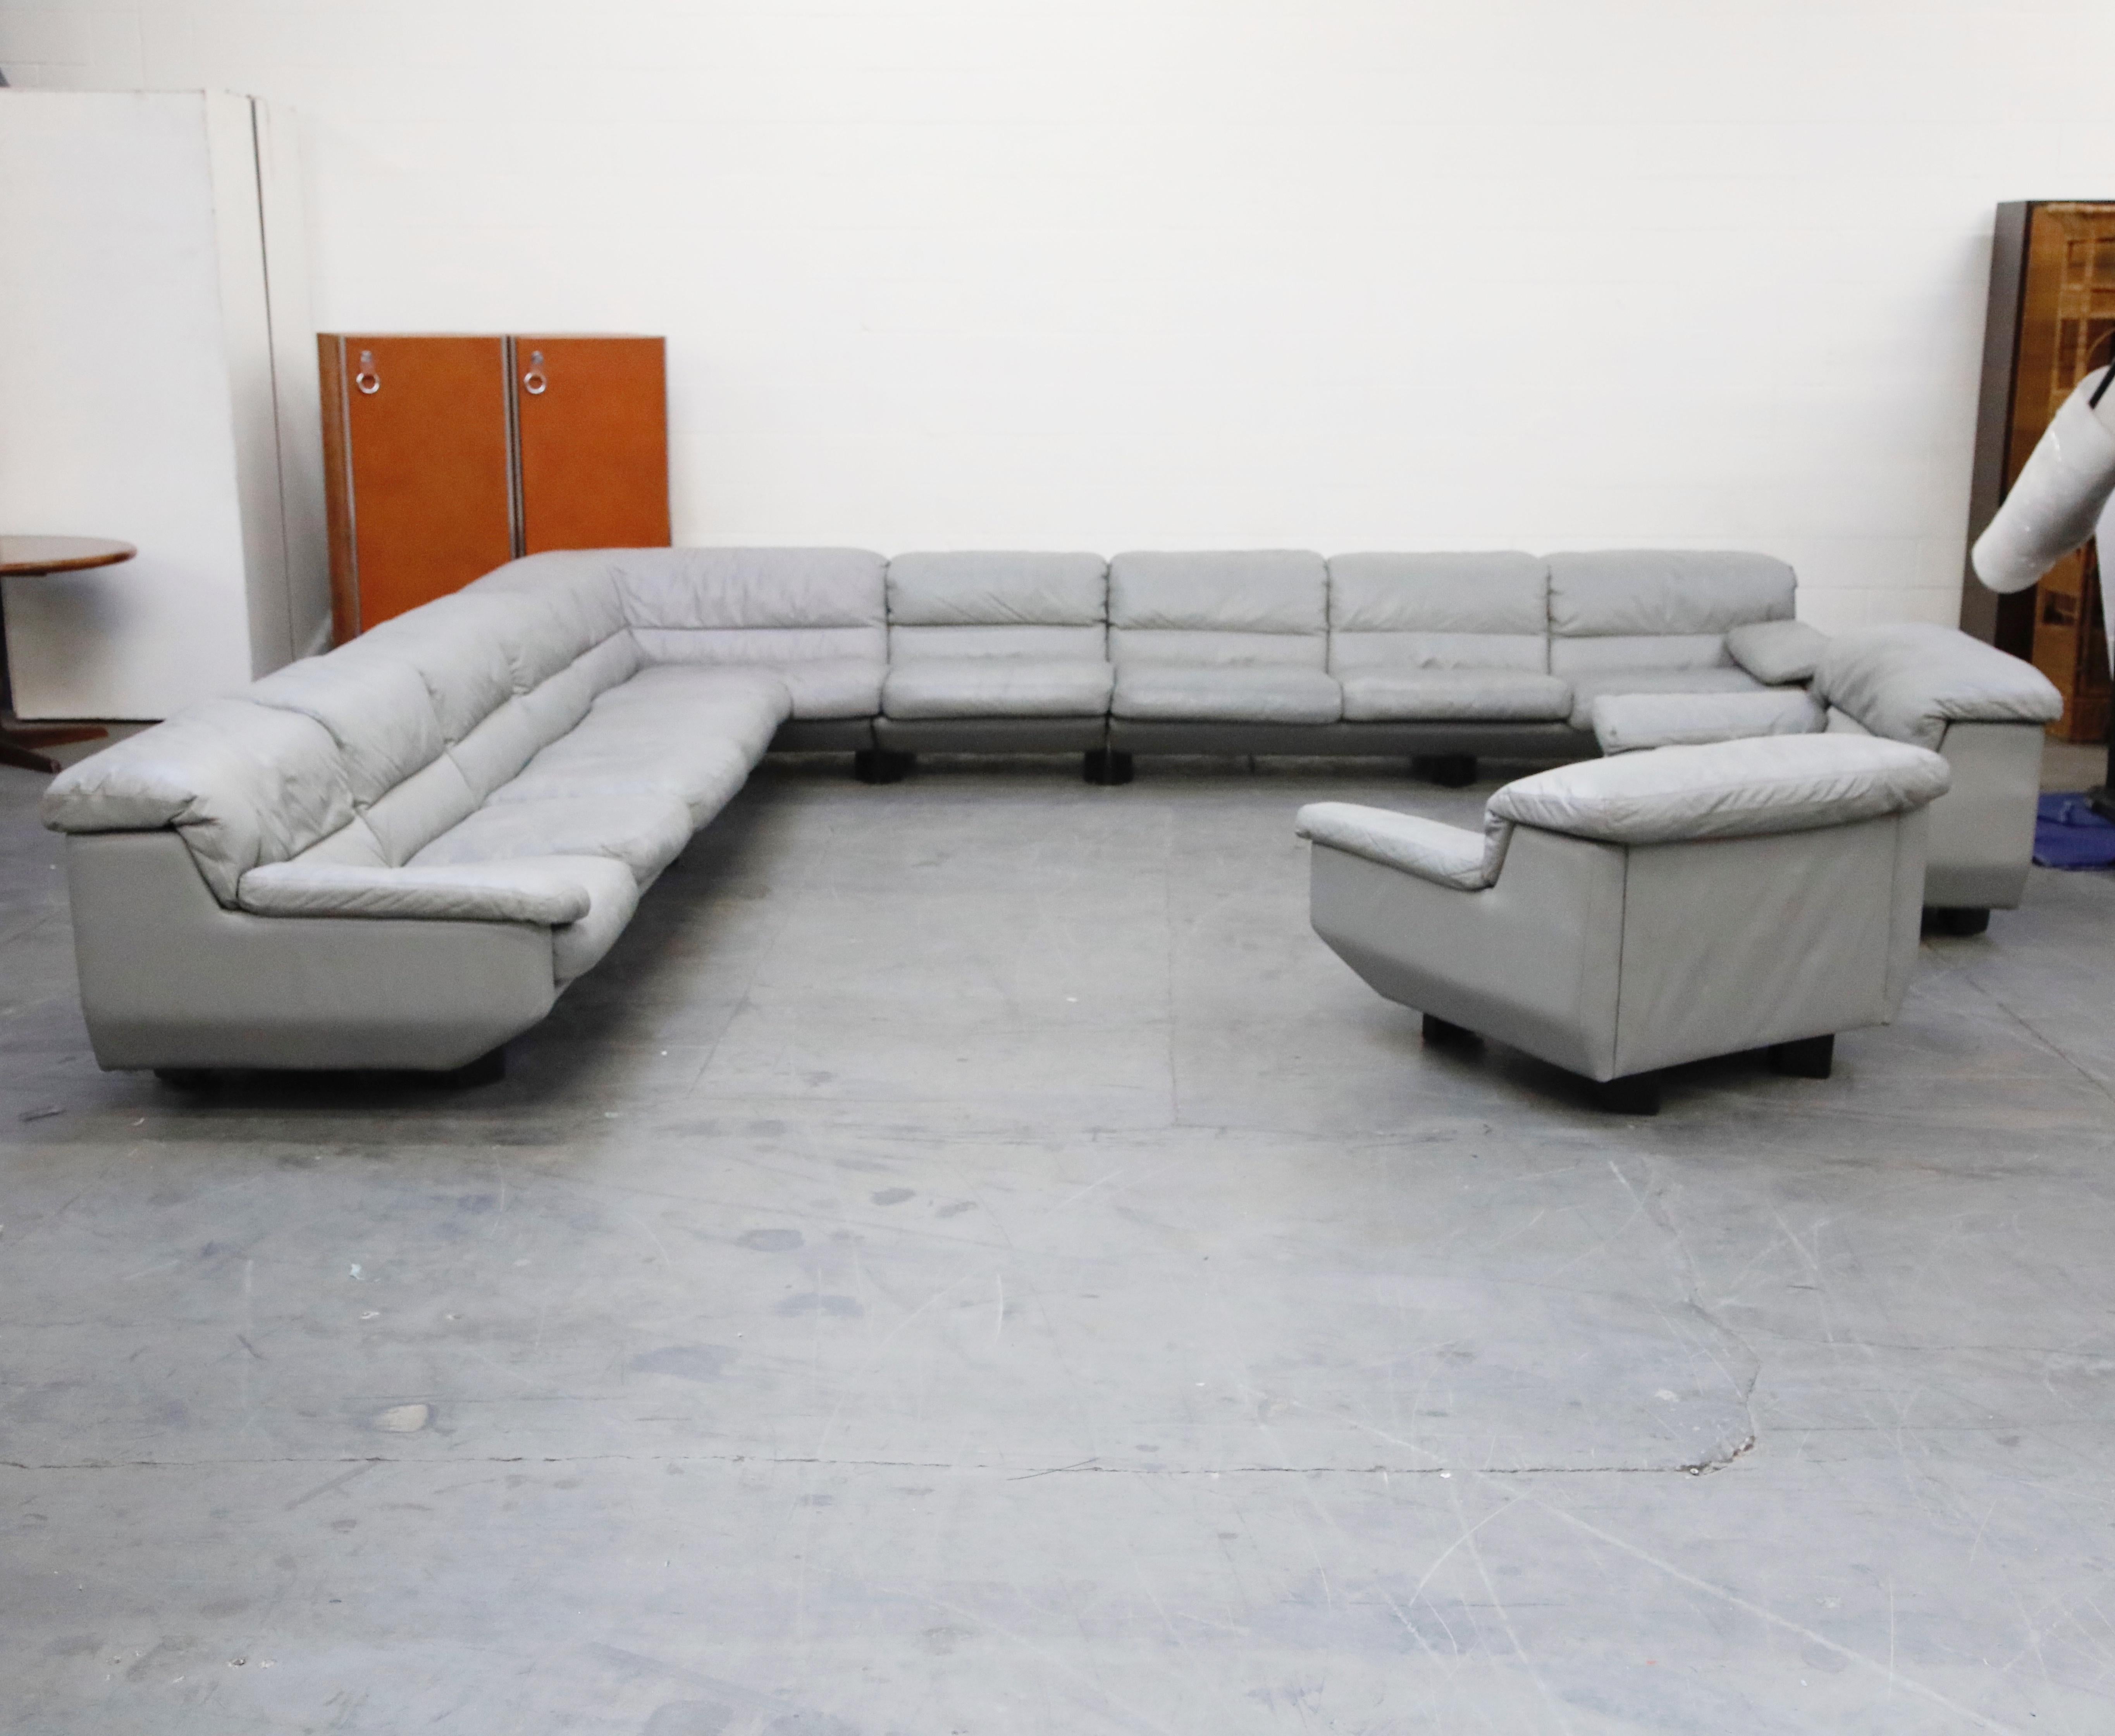 This incredibly huge Postmodern gray leather living room system is by Preview, signed with original labels on each section and date stamped 1988. The modular set comprises of a corner section, two long 3-seat sections each with one arm, two single